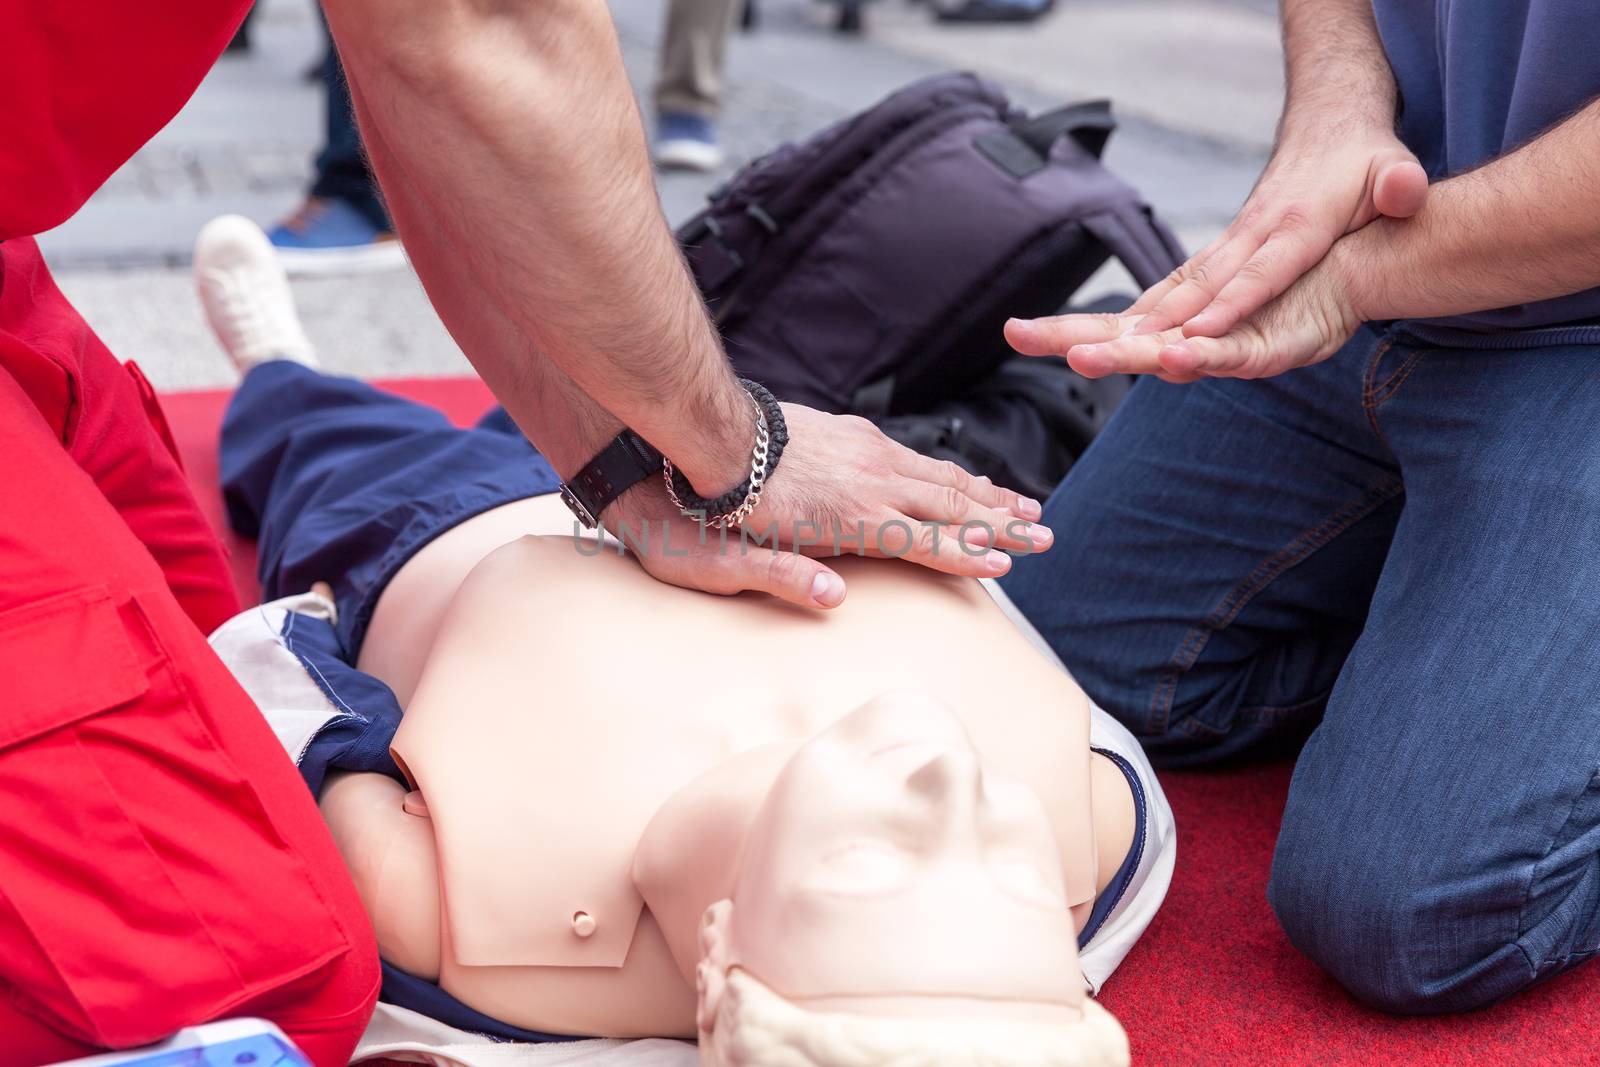 First aid training detail. CPR. by wellphoto